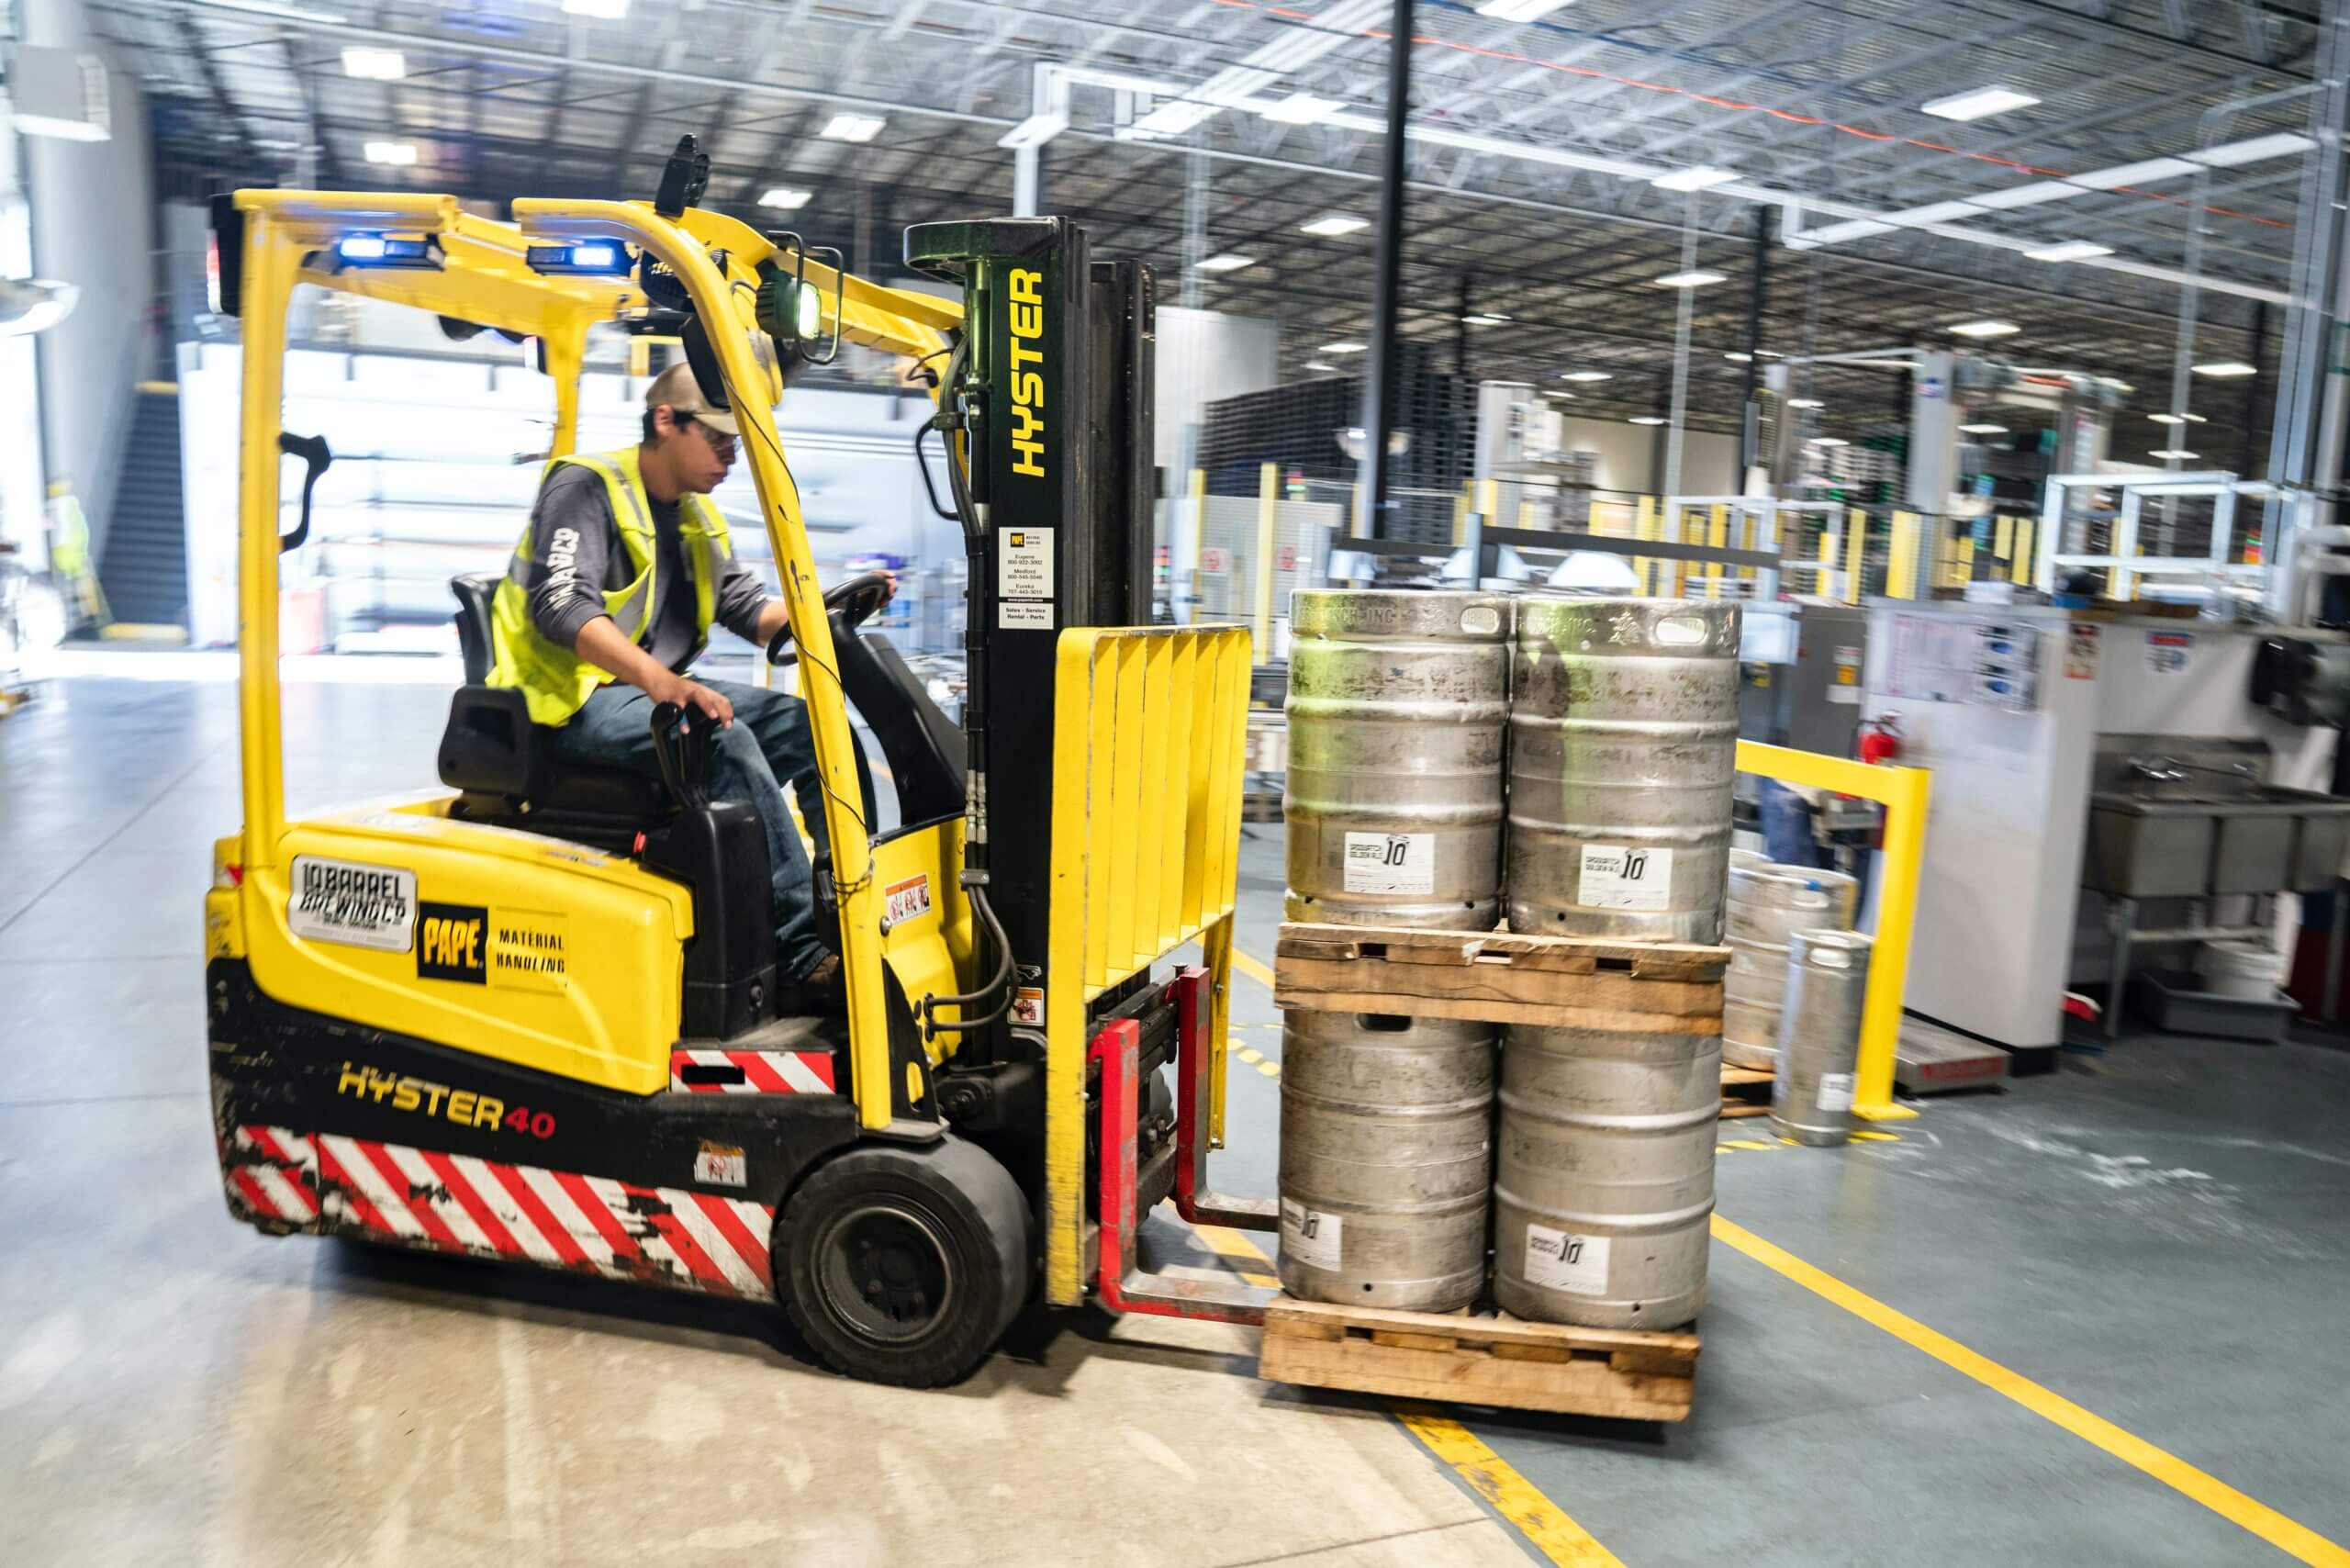 Warehouse worker using a forklift lifting pallets